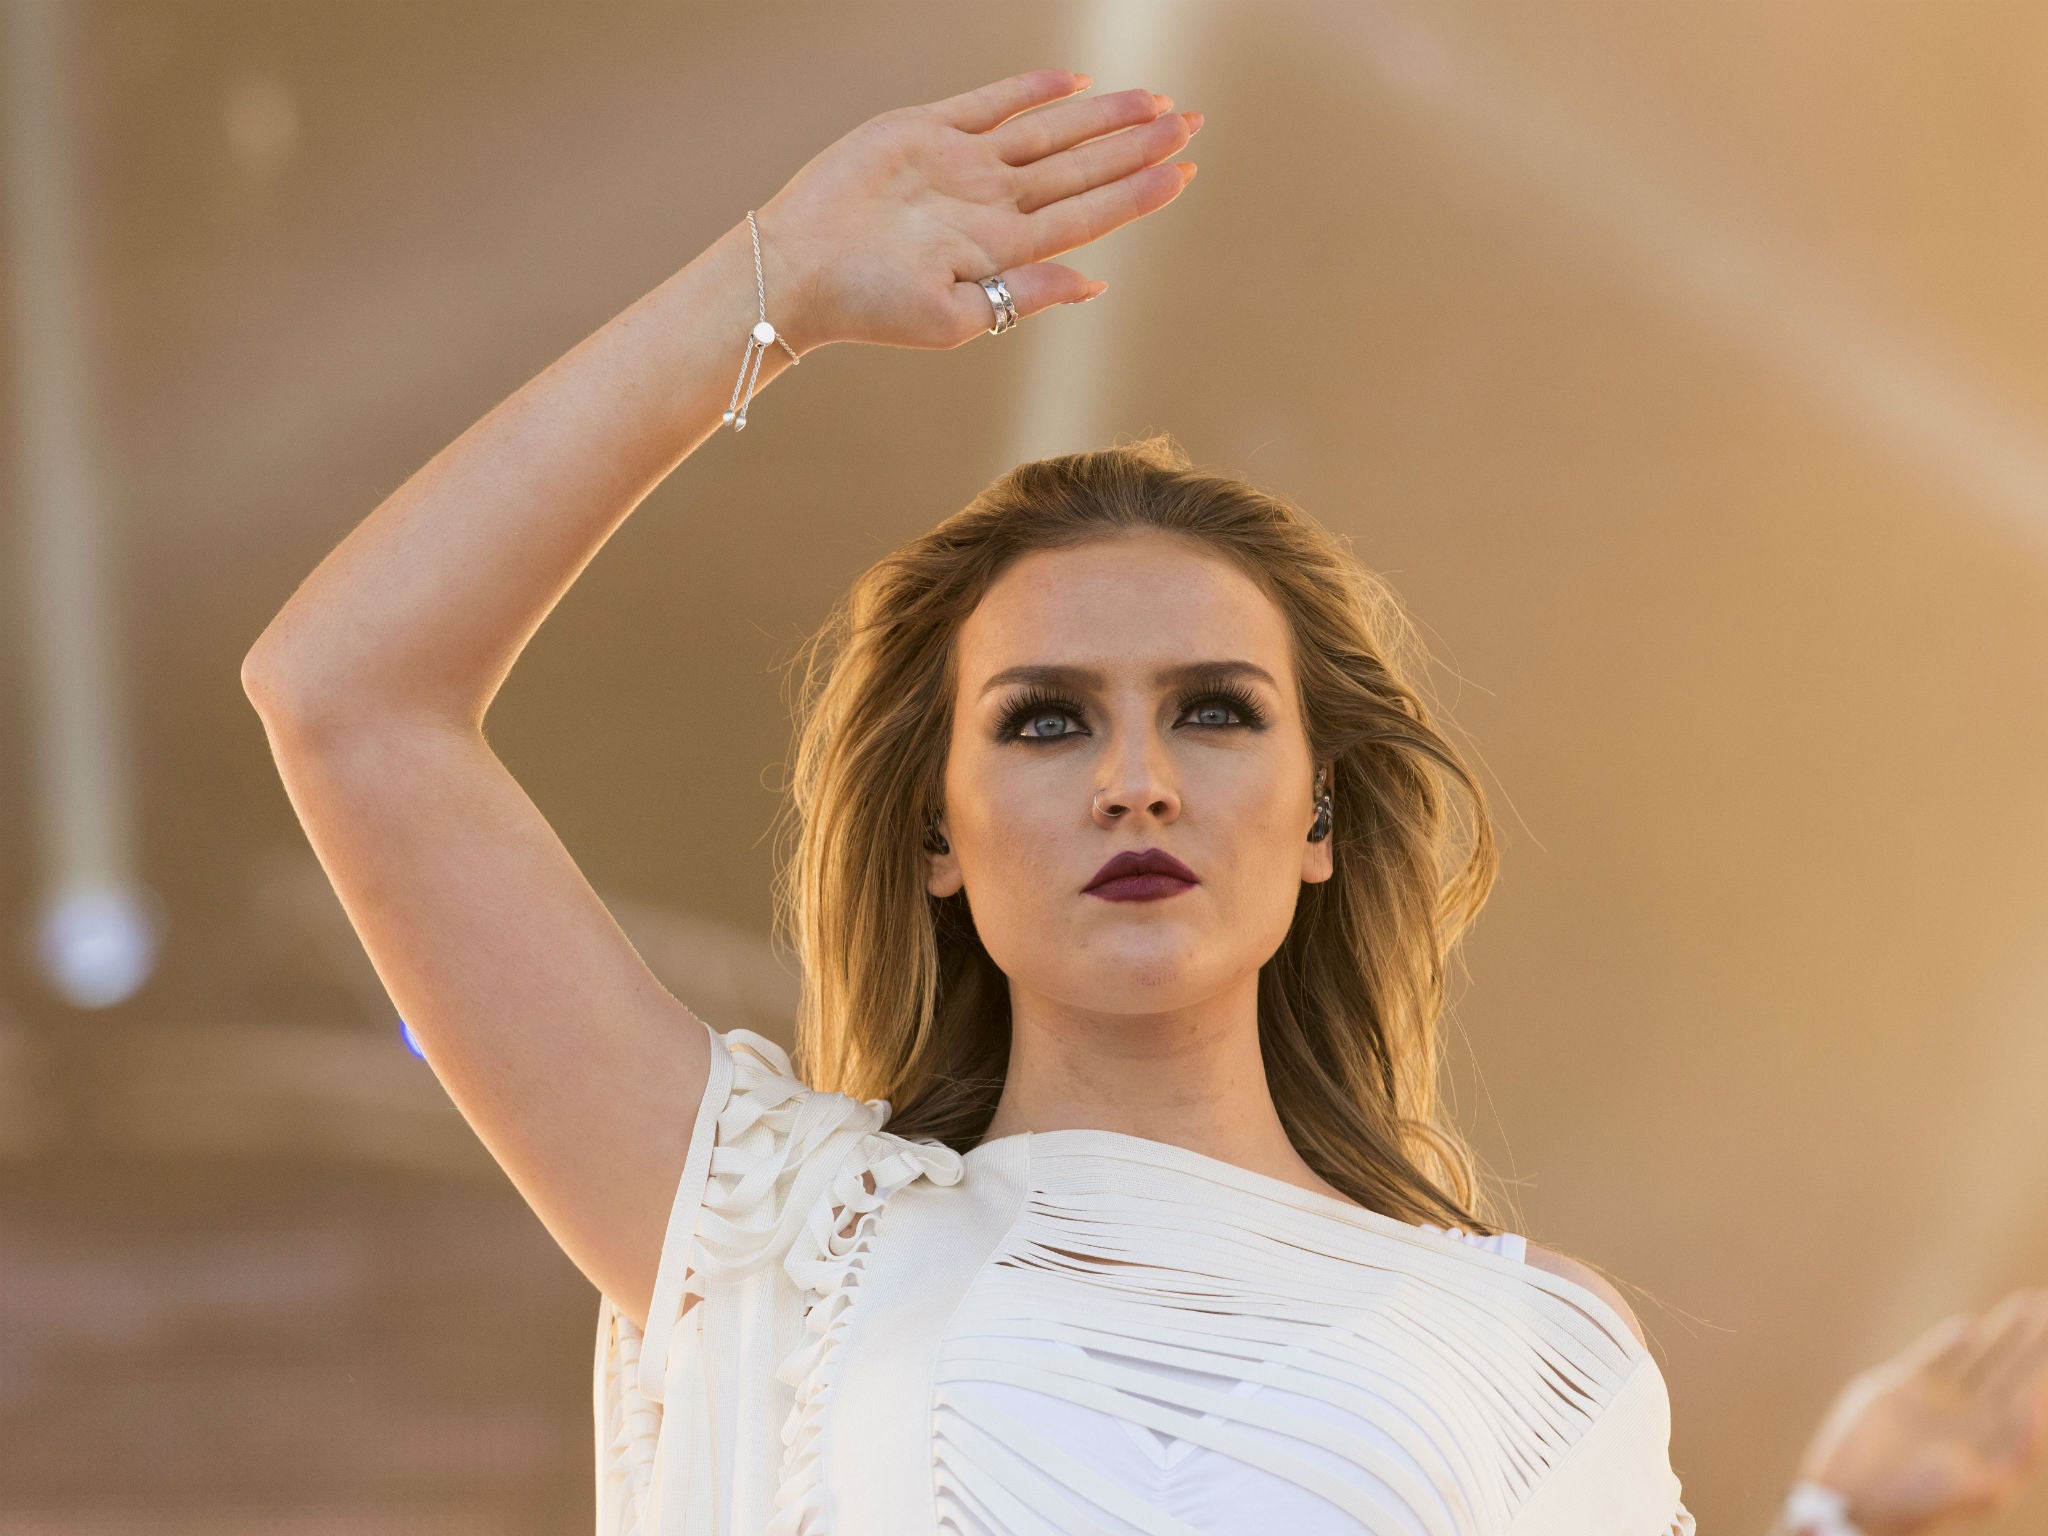 Little Mix Star Perrie Edwards Breaks Down In Tears During Emotional Performance With Bandmates